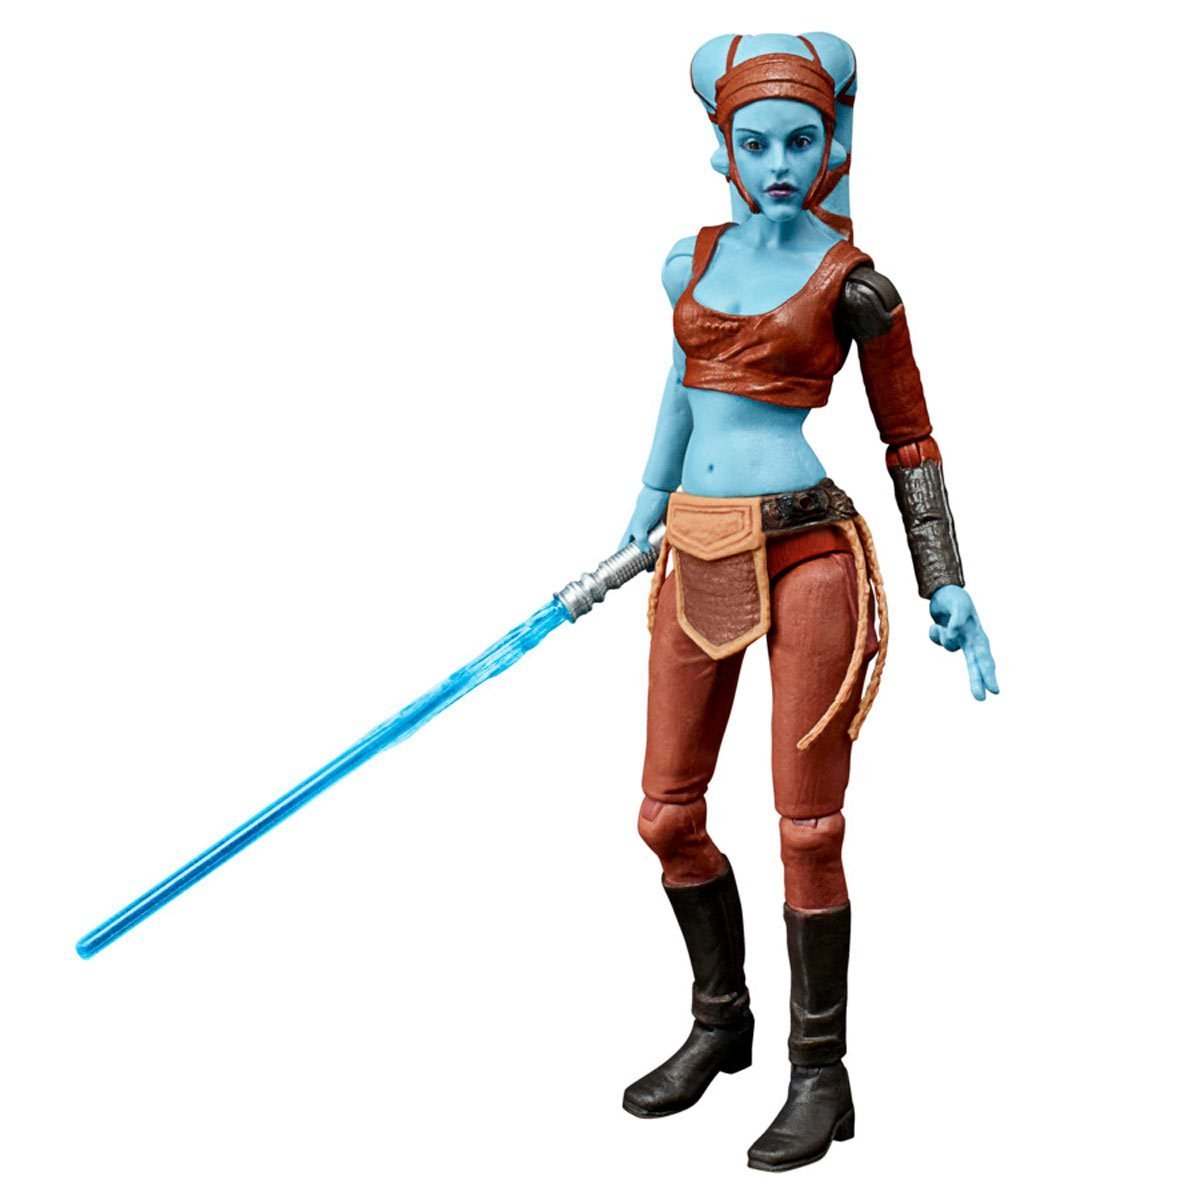 Star Wars The Vintage Collection Aayla Secura (Clone Wars) 3 3/4-Inch Action Figure - Pop-O-Loco - Hasbro